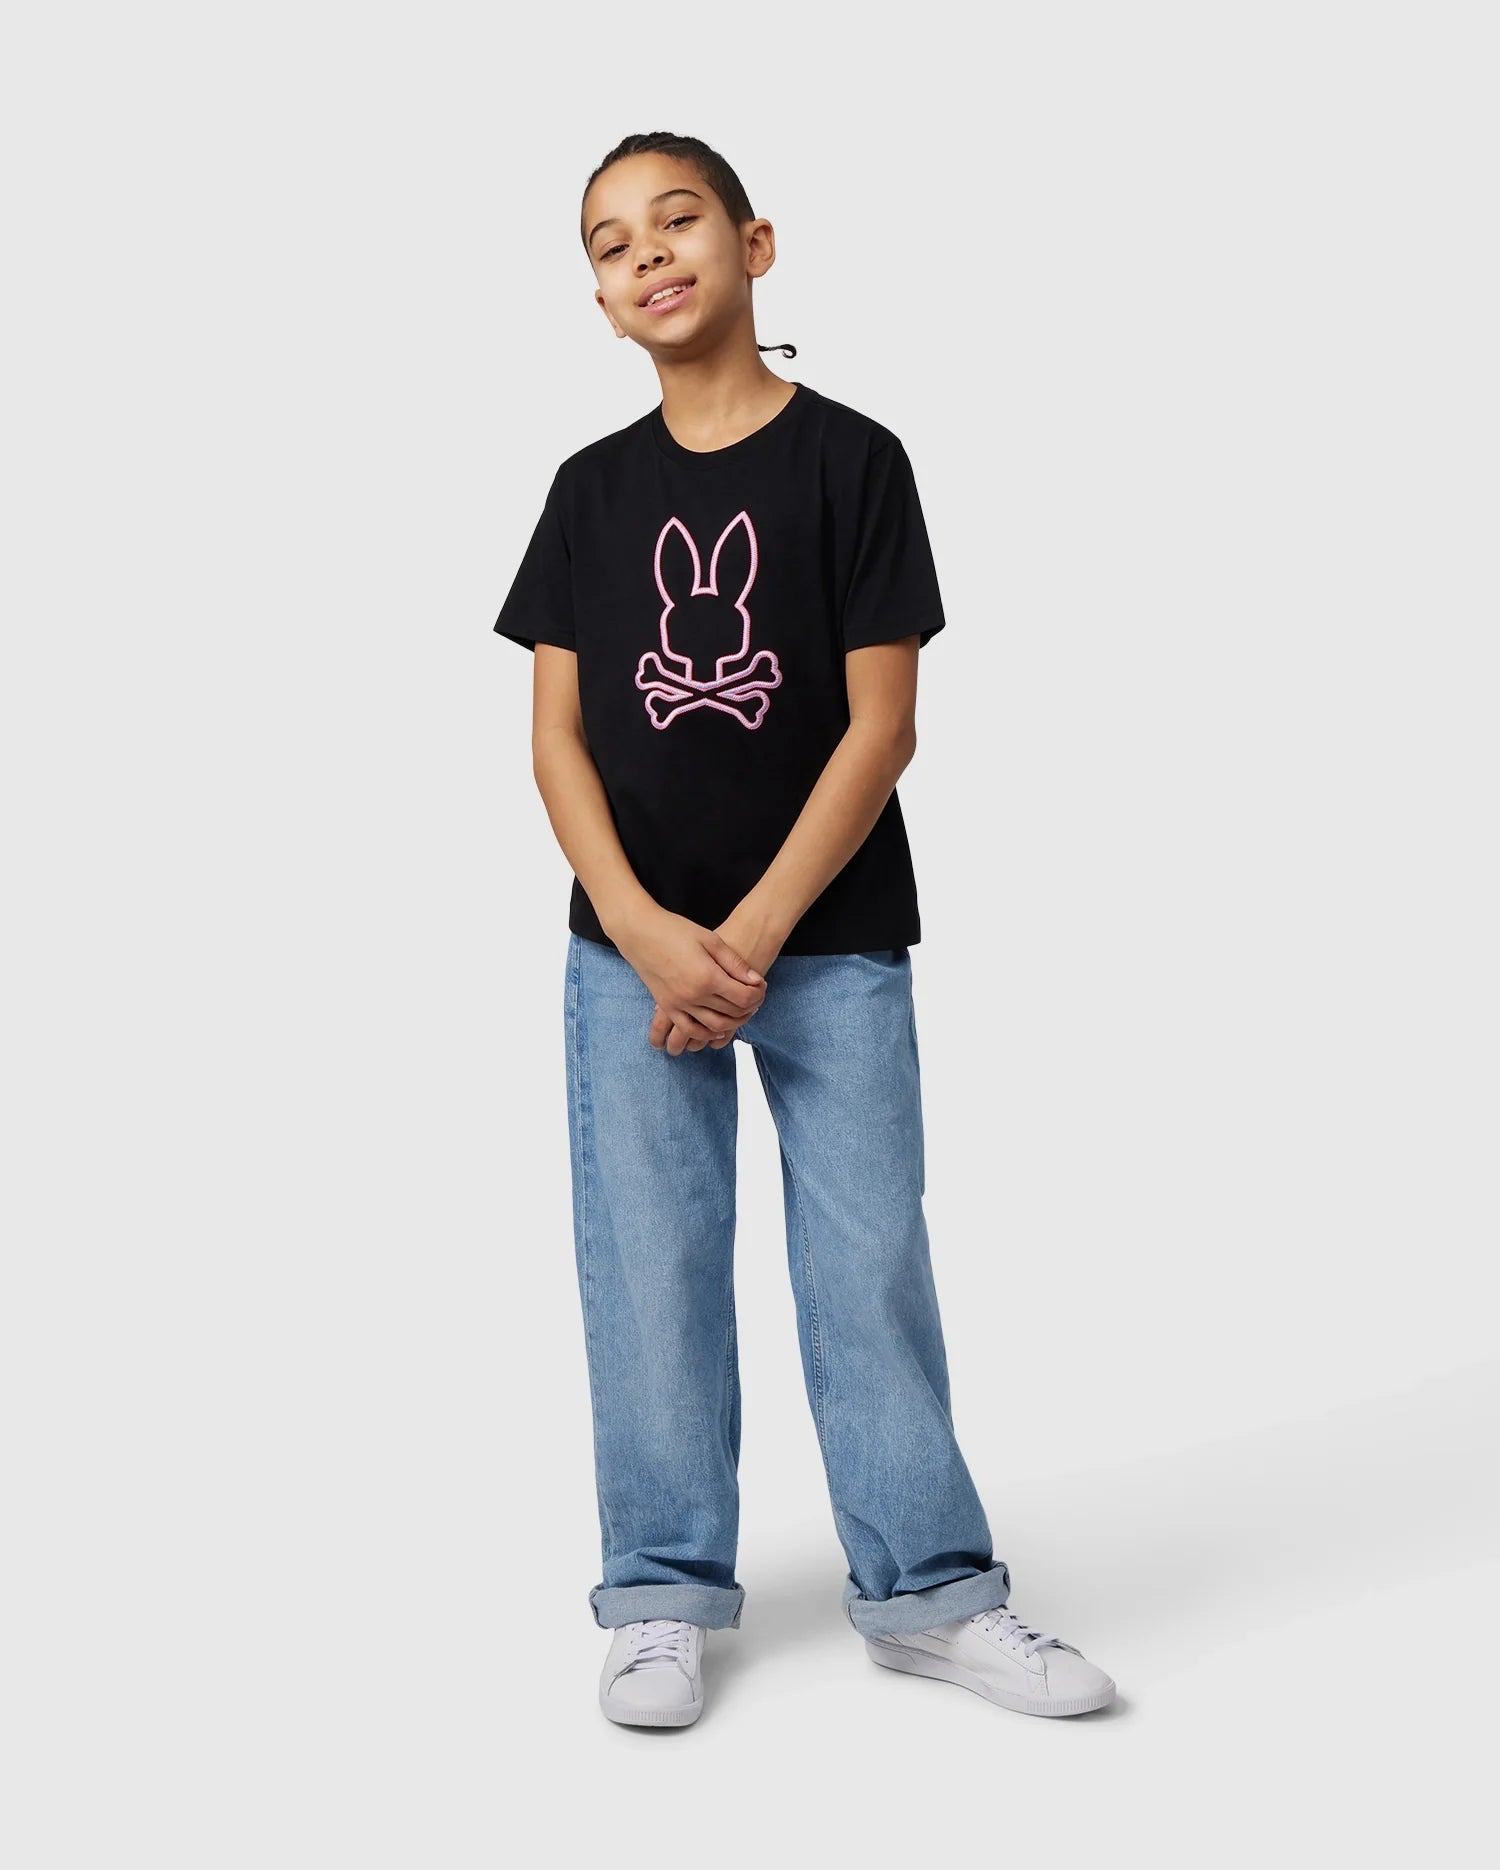 New Arrivals - Kids Polos, Graphic Tees & Shorts